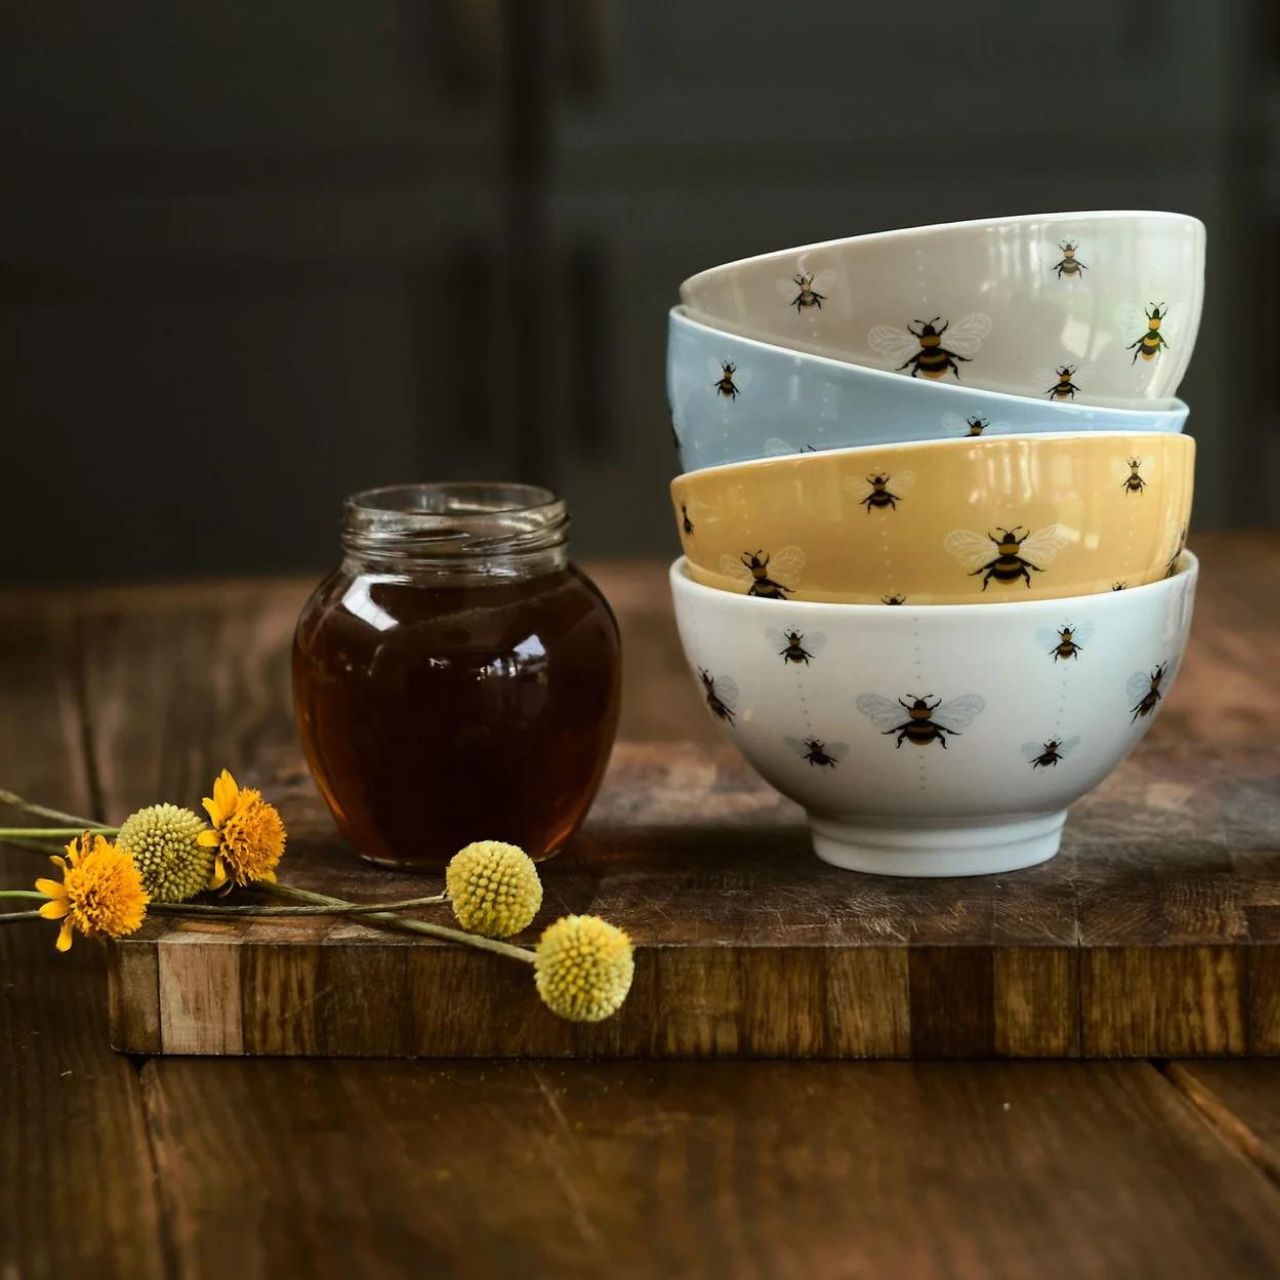 Tipperary Crystal Bee Cereal Bowls Set of 4 - NEW 2023  Add a splash of colour to your kitchen with our Tipperary Crystal New Bees Collection. The stunning range features the busy bumble bee design sure to brighten up your kitchen.